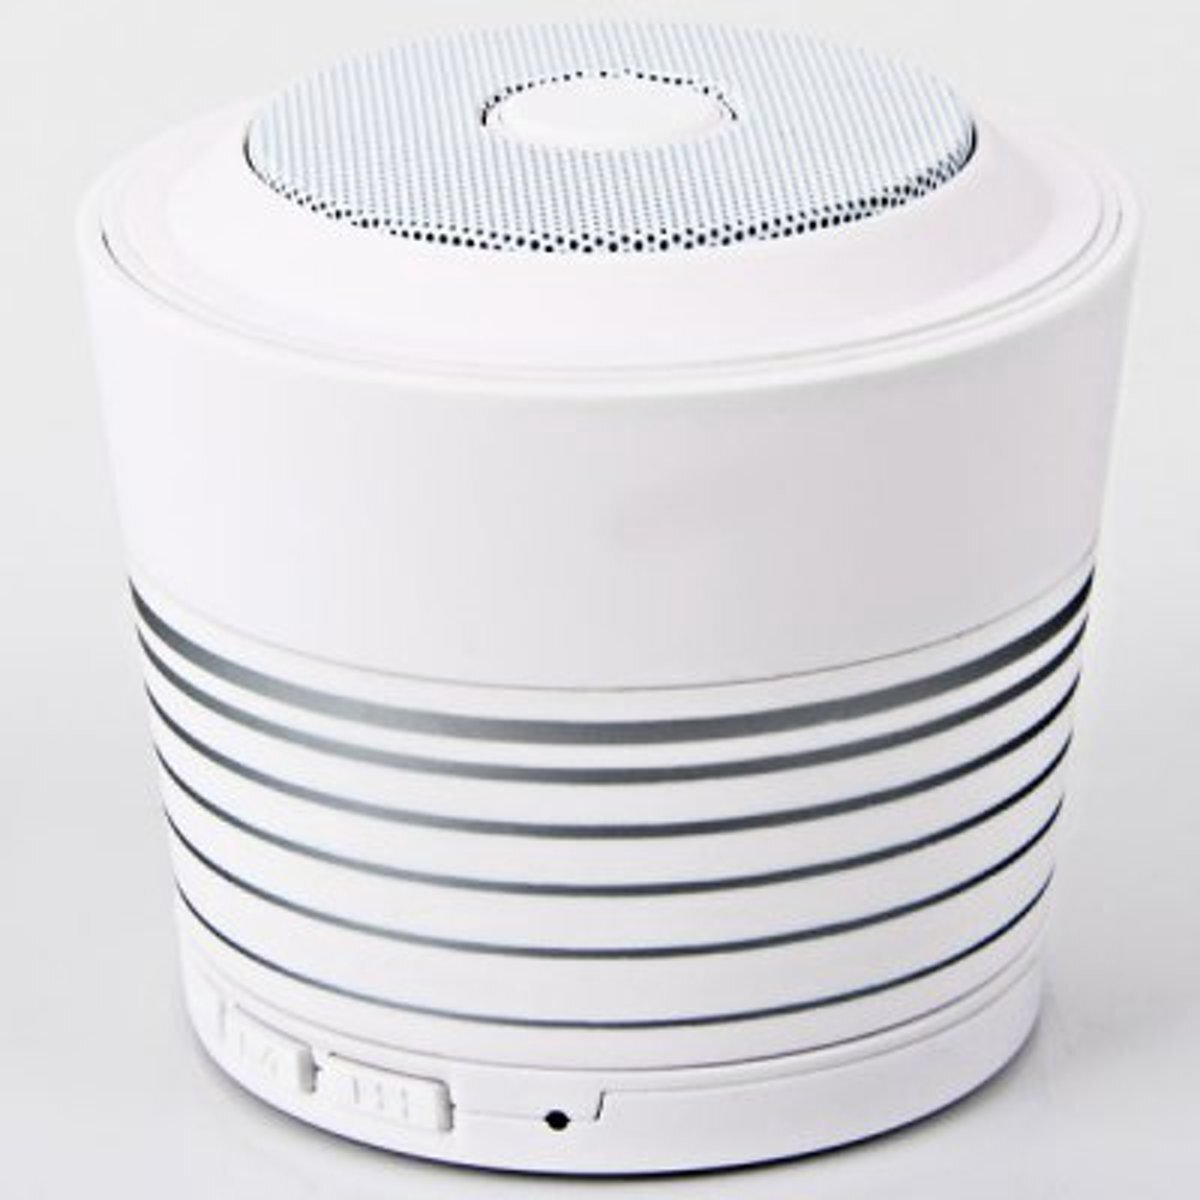 Evertech Bluetooth Stereo Speaker with FM Radio _ White wit